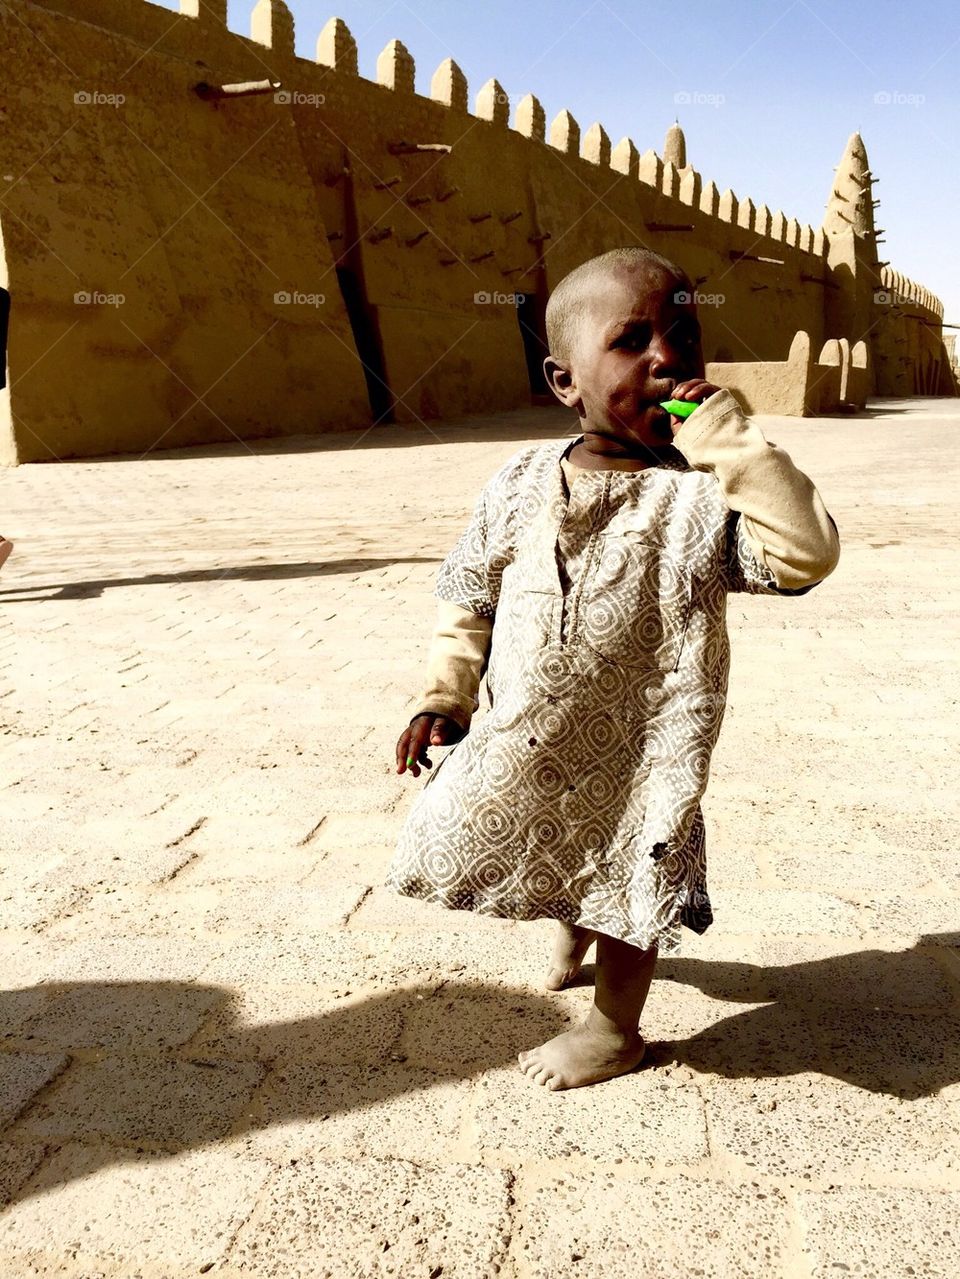 Child at Djingarey Ber. Timbuktu returning to normal life after loothing by extremist rebells